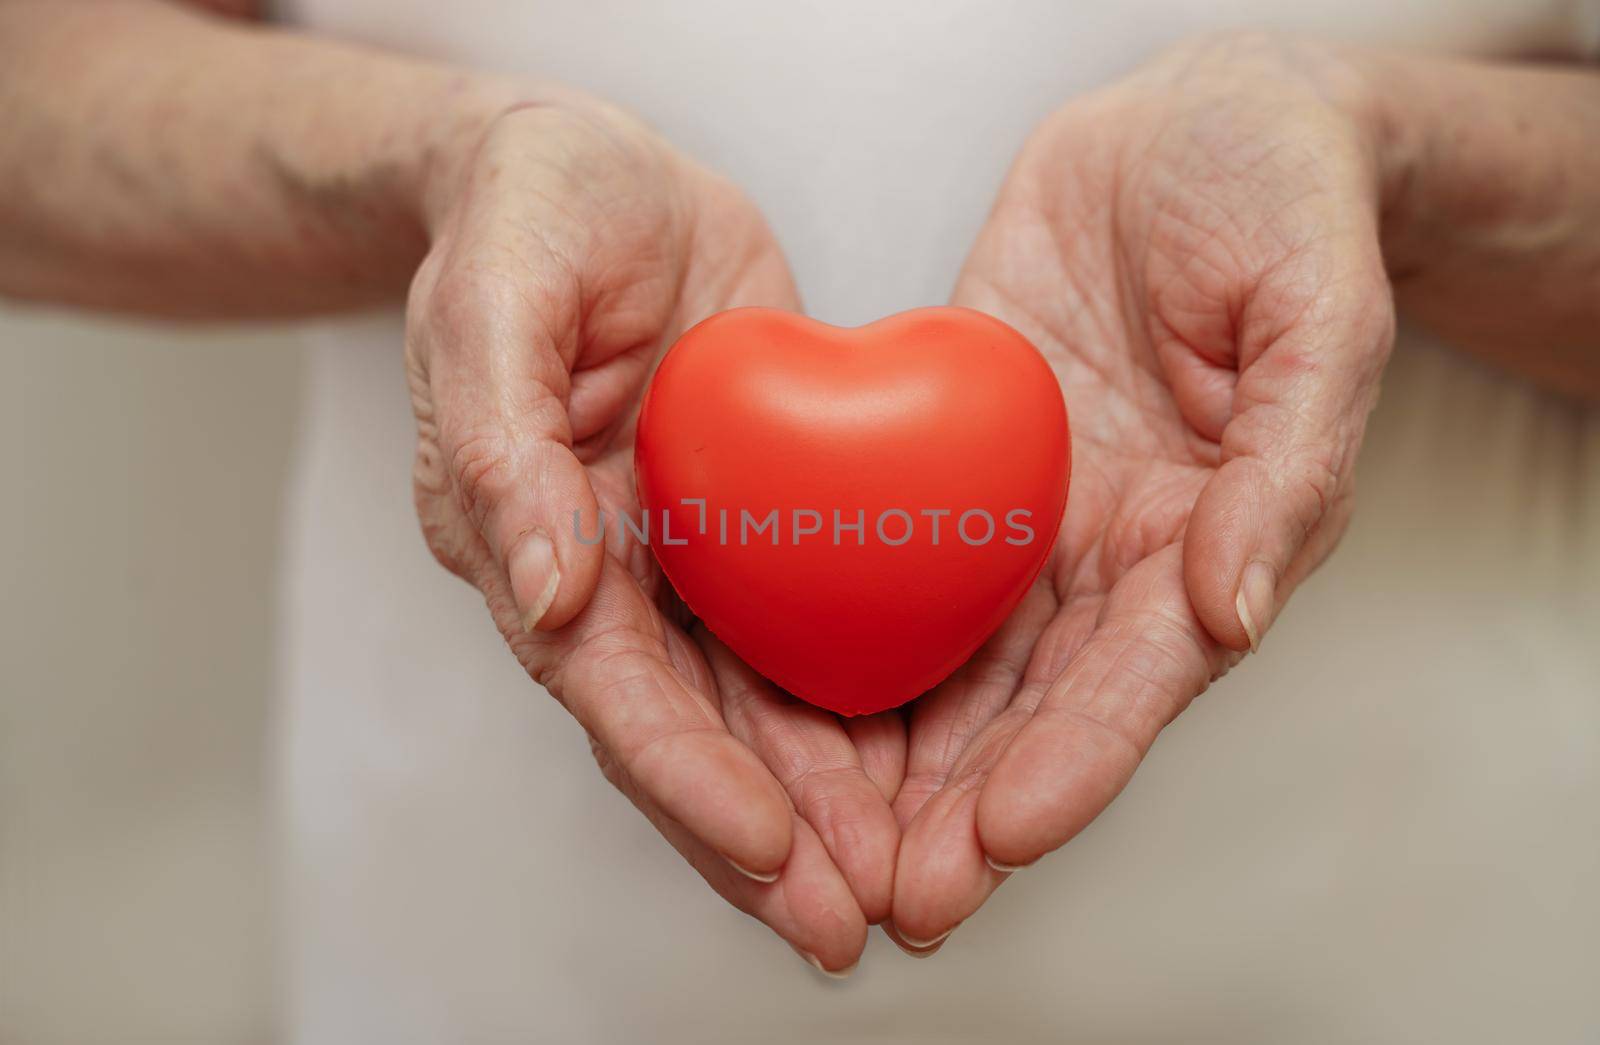 Grandmother woman hands holding red heart, healthcare, love, organ donation, mindfulness, wellbeing, family insurance and CSR concept, world heart day, world health day, national organ donor day by Matiunina